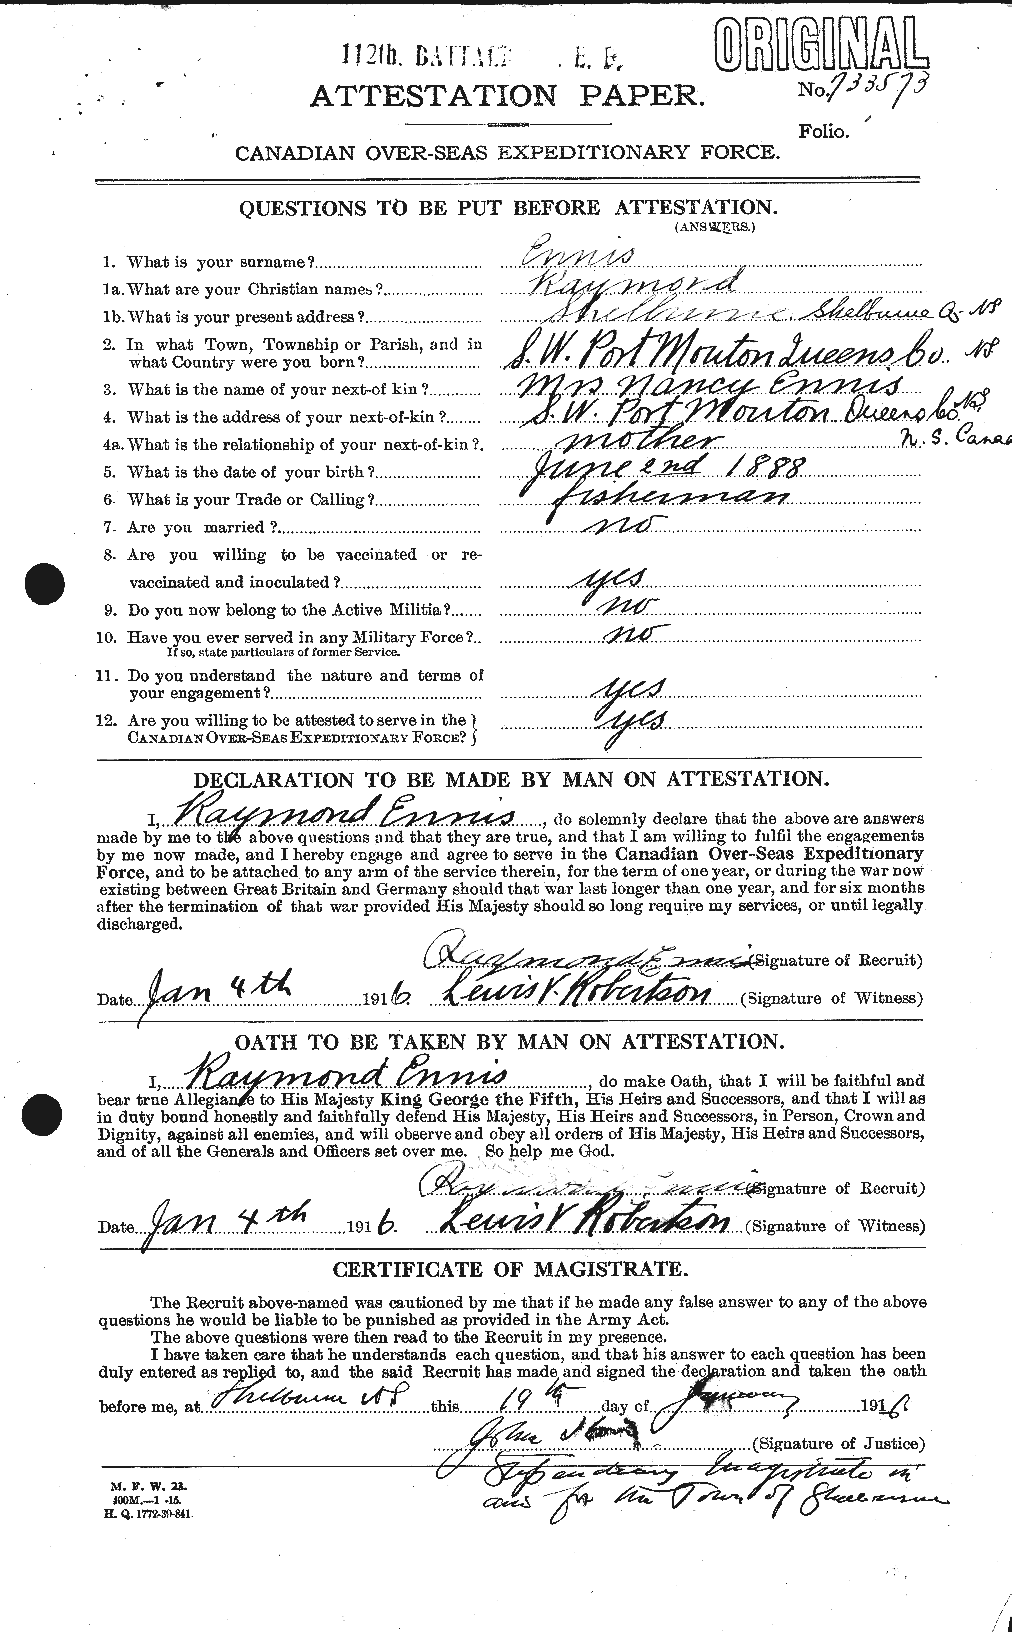 Personnel Records of the First World War - CEF 317337a